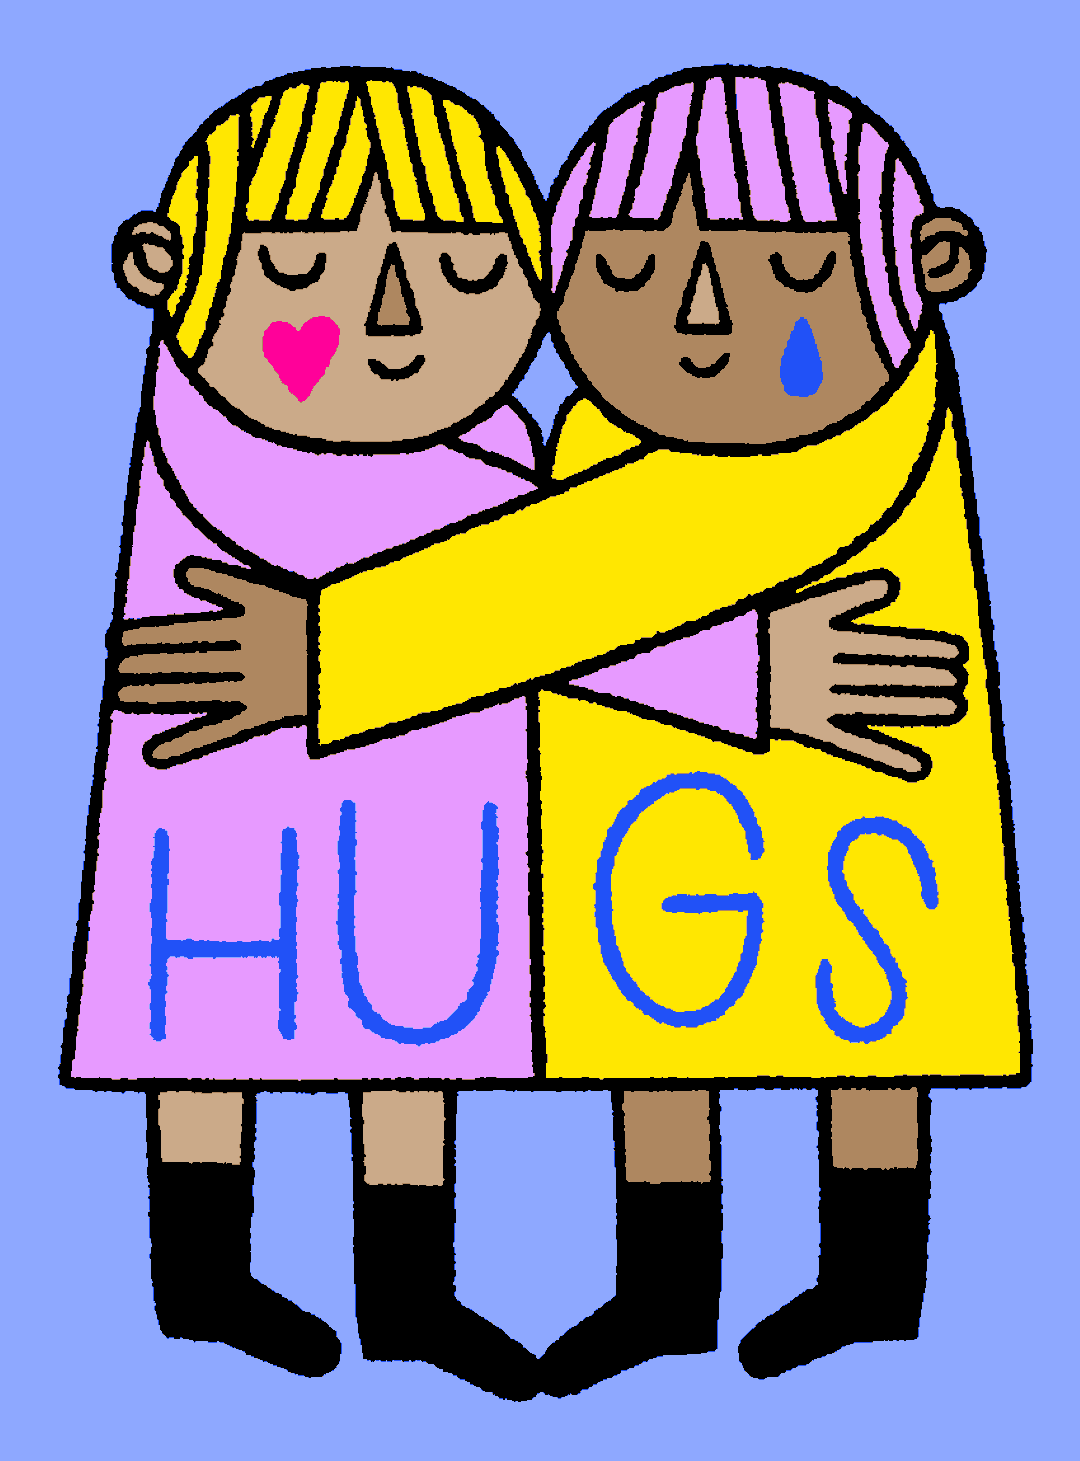 Digital illustration gif. Two people in pink and yellow shirts with contrasting pink and blonde hair, hug each other tightly with eyes closed and serene expressions. A tear falls down one of their faces as the other has a heart on their face. Text, "hugs."